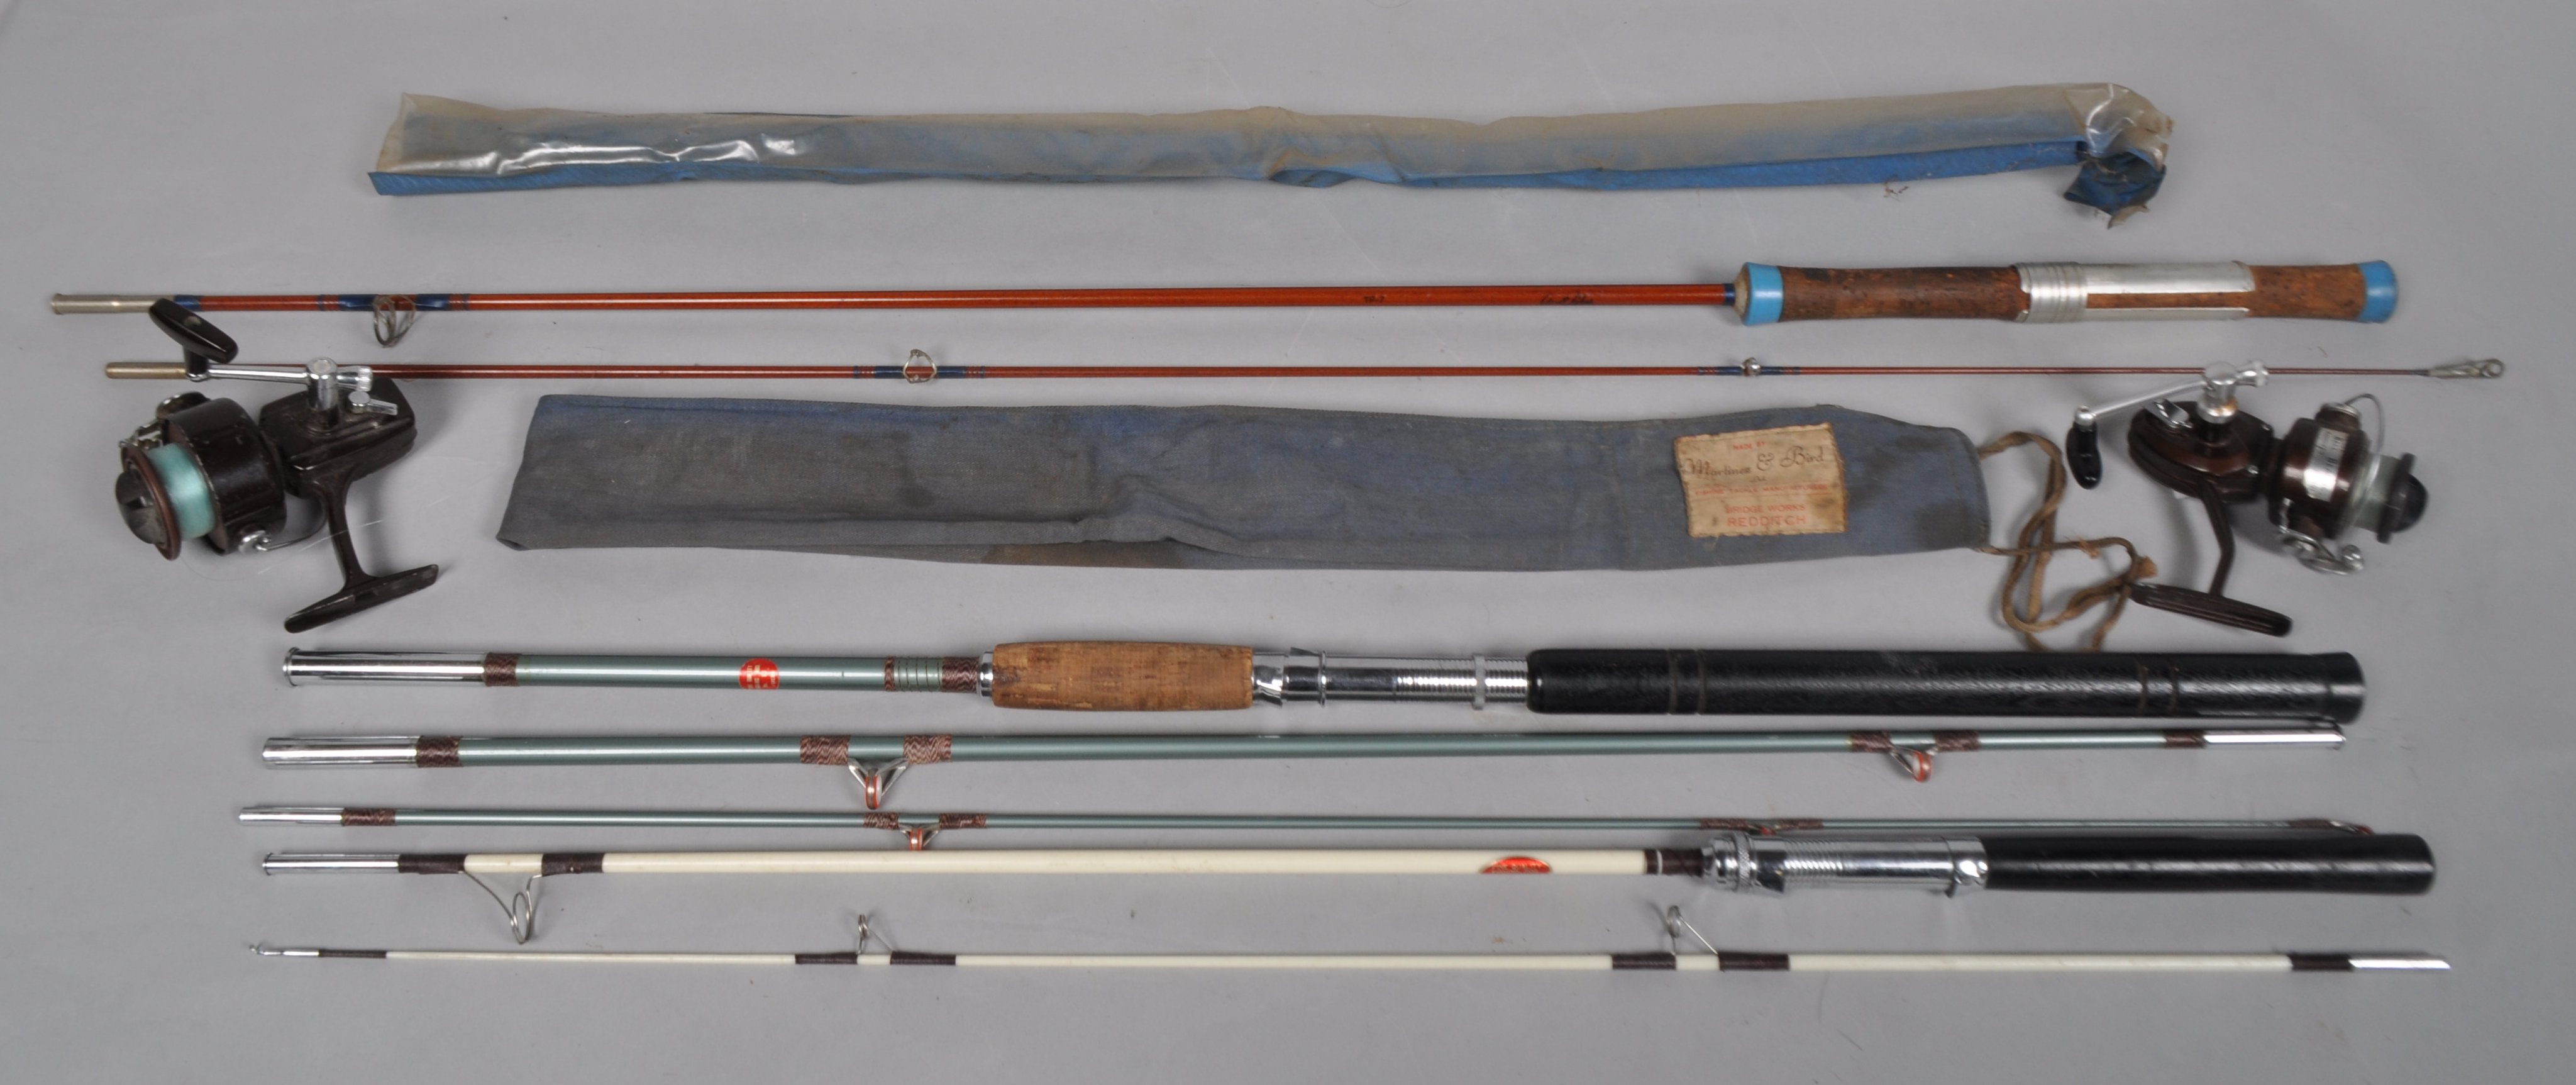 A collection of spinning rods and reels